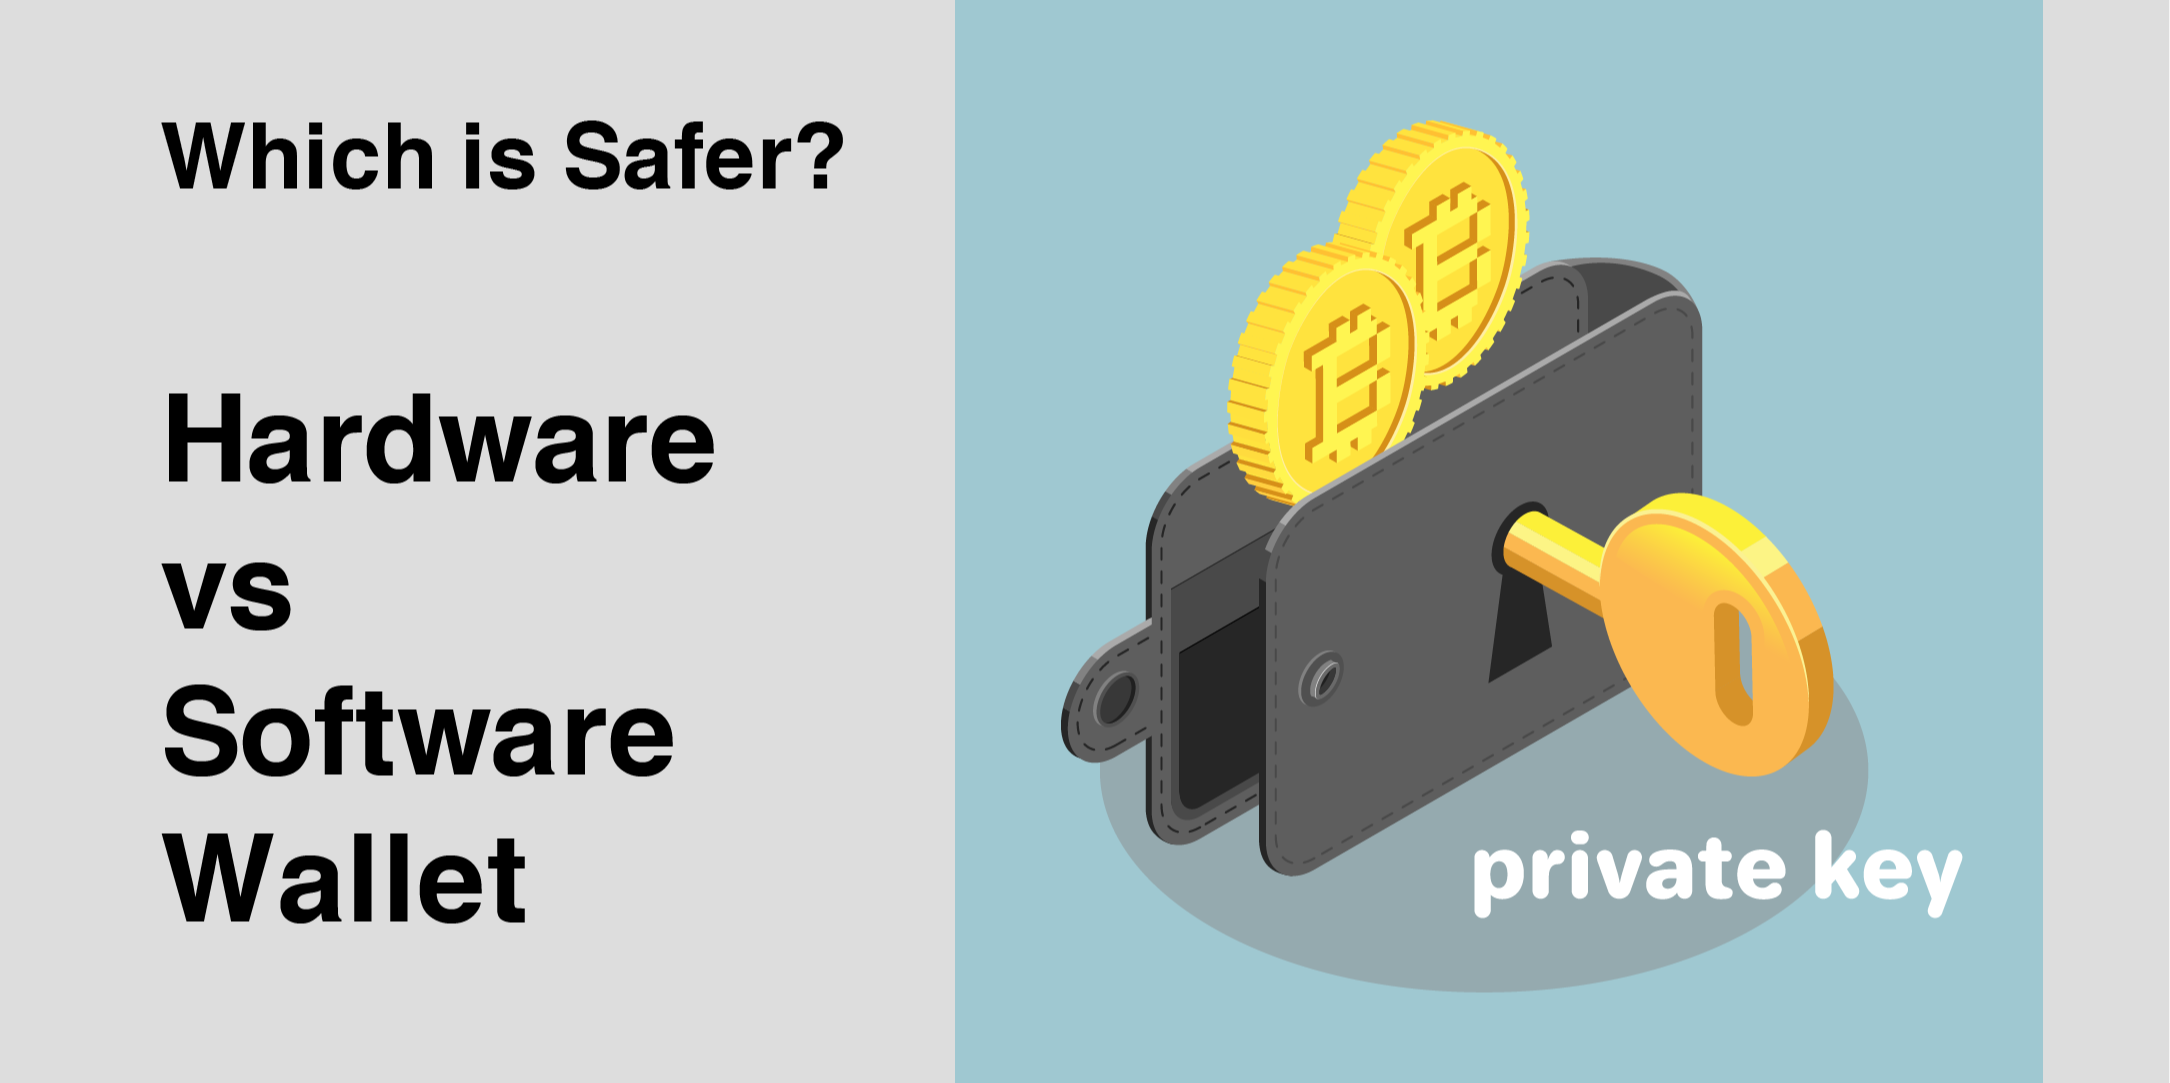 2021 03 31 Which is Safer Hardware vs Software Wallet 4 1